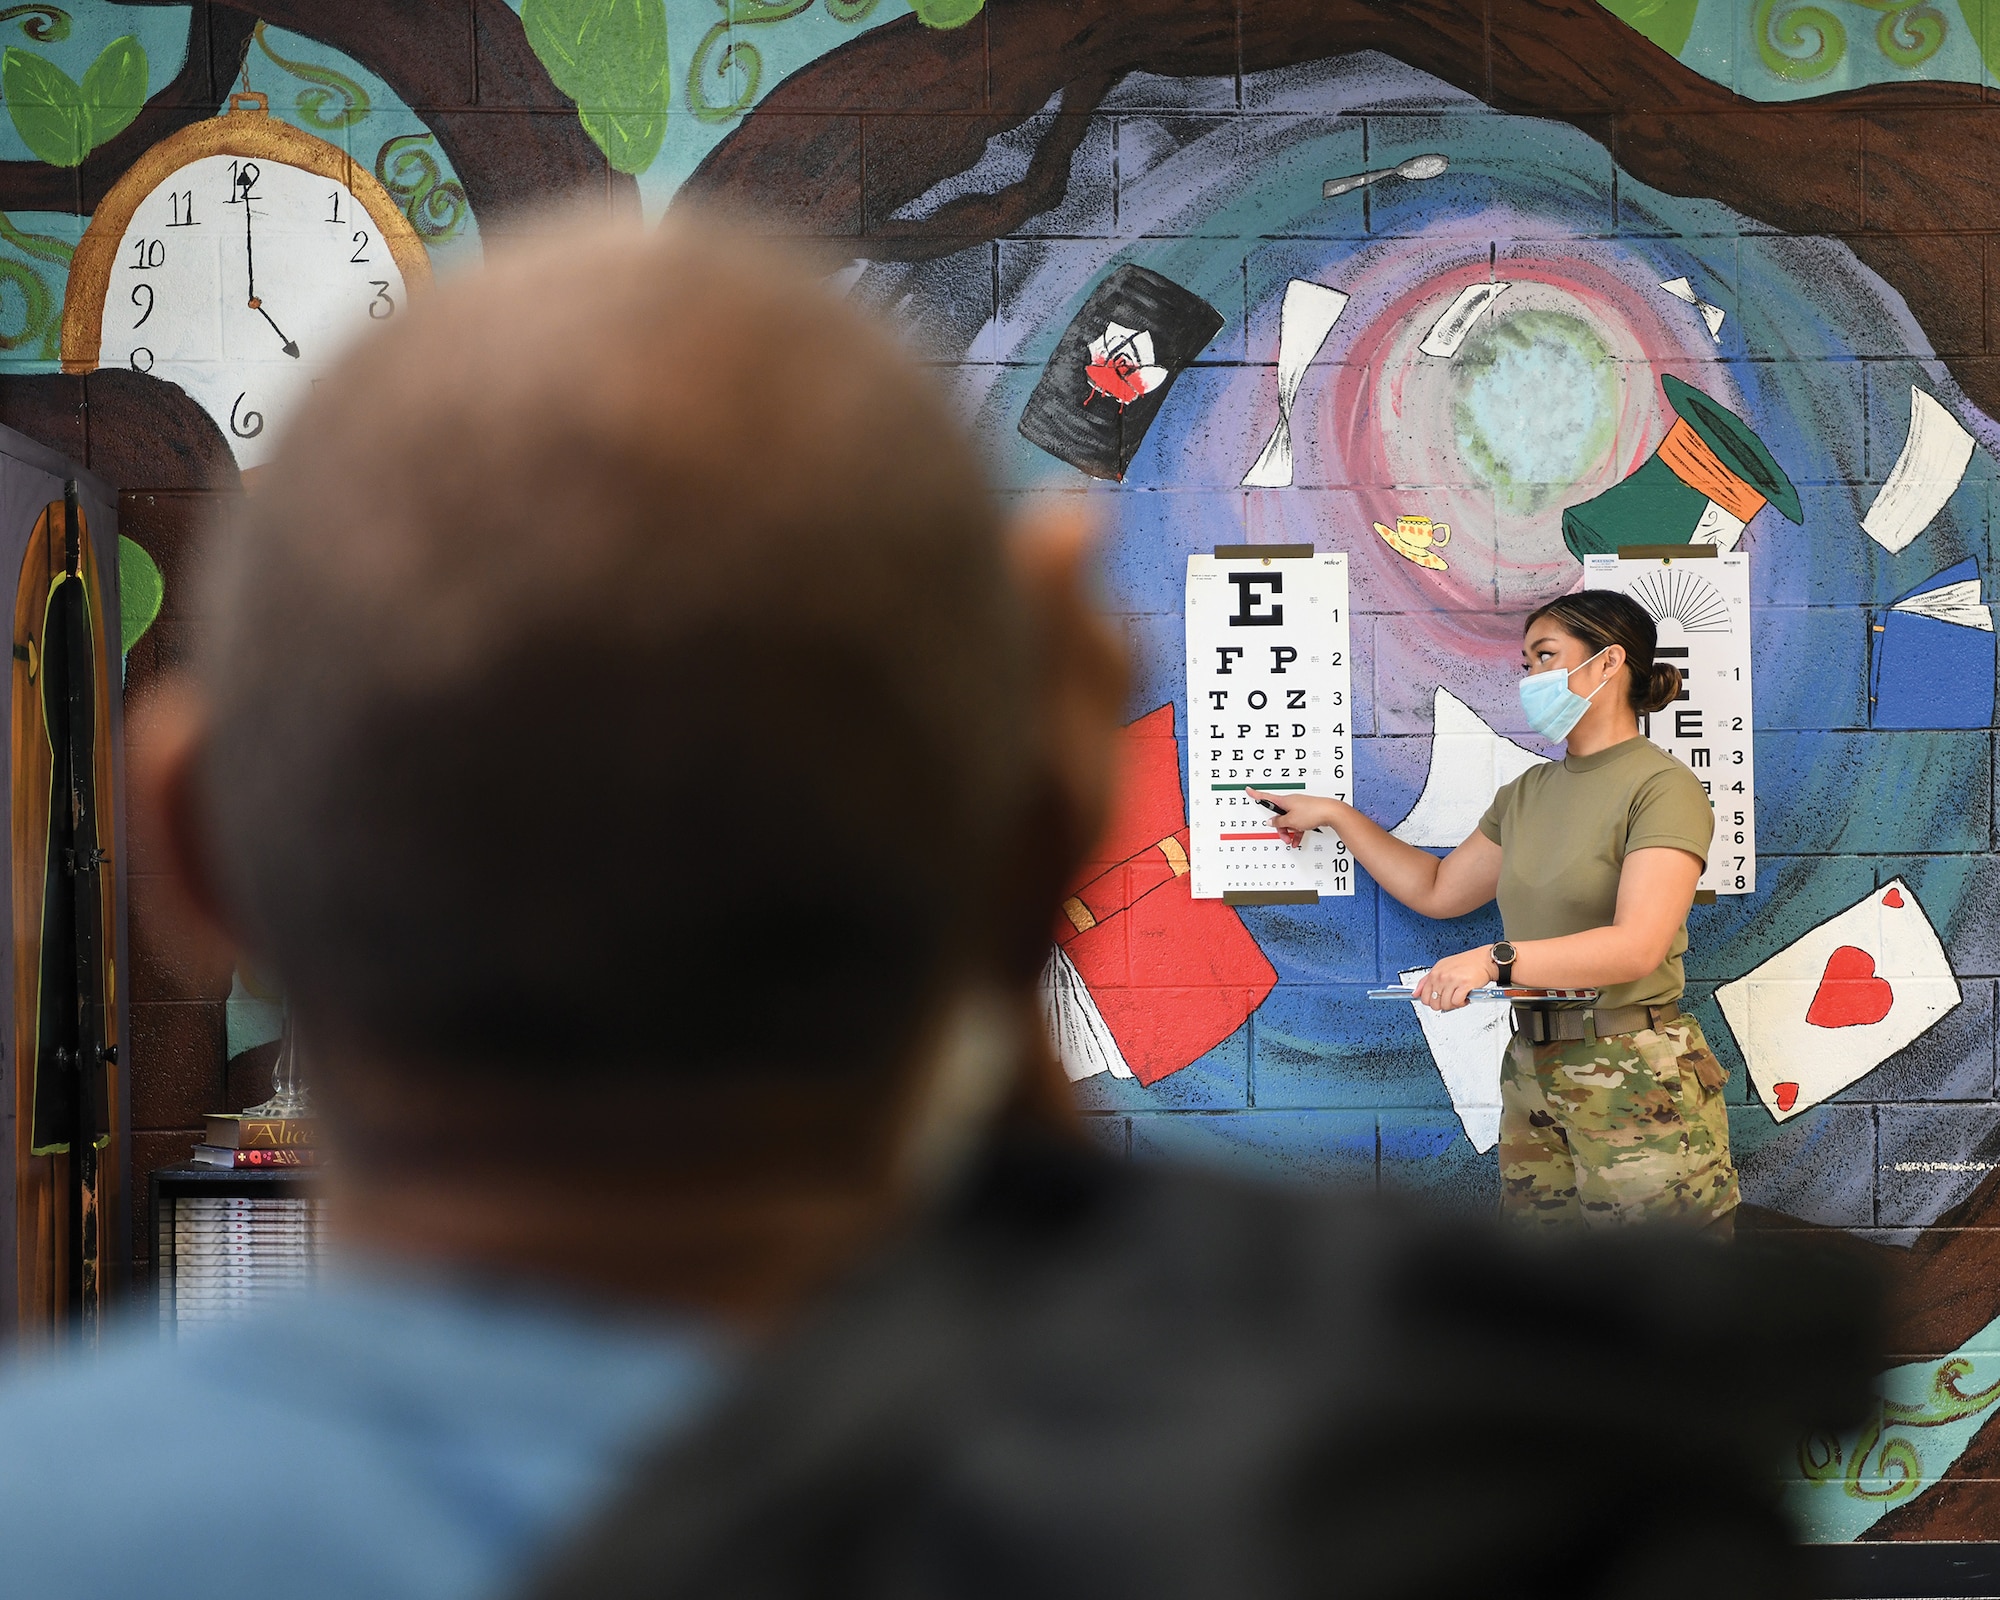 Image of an Airman pointing to eye chart.